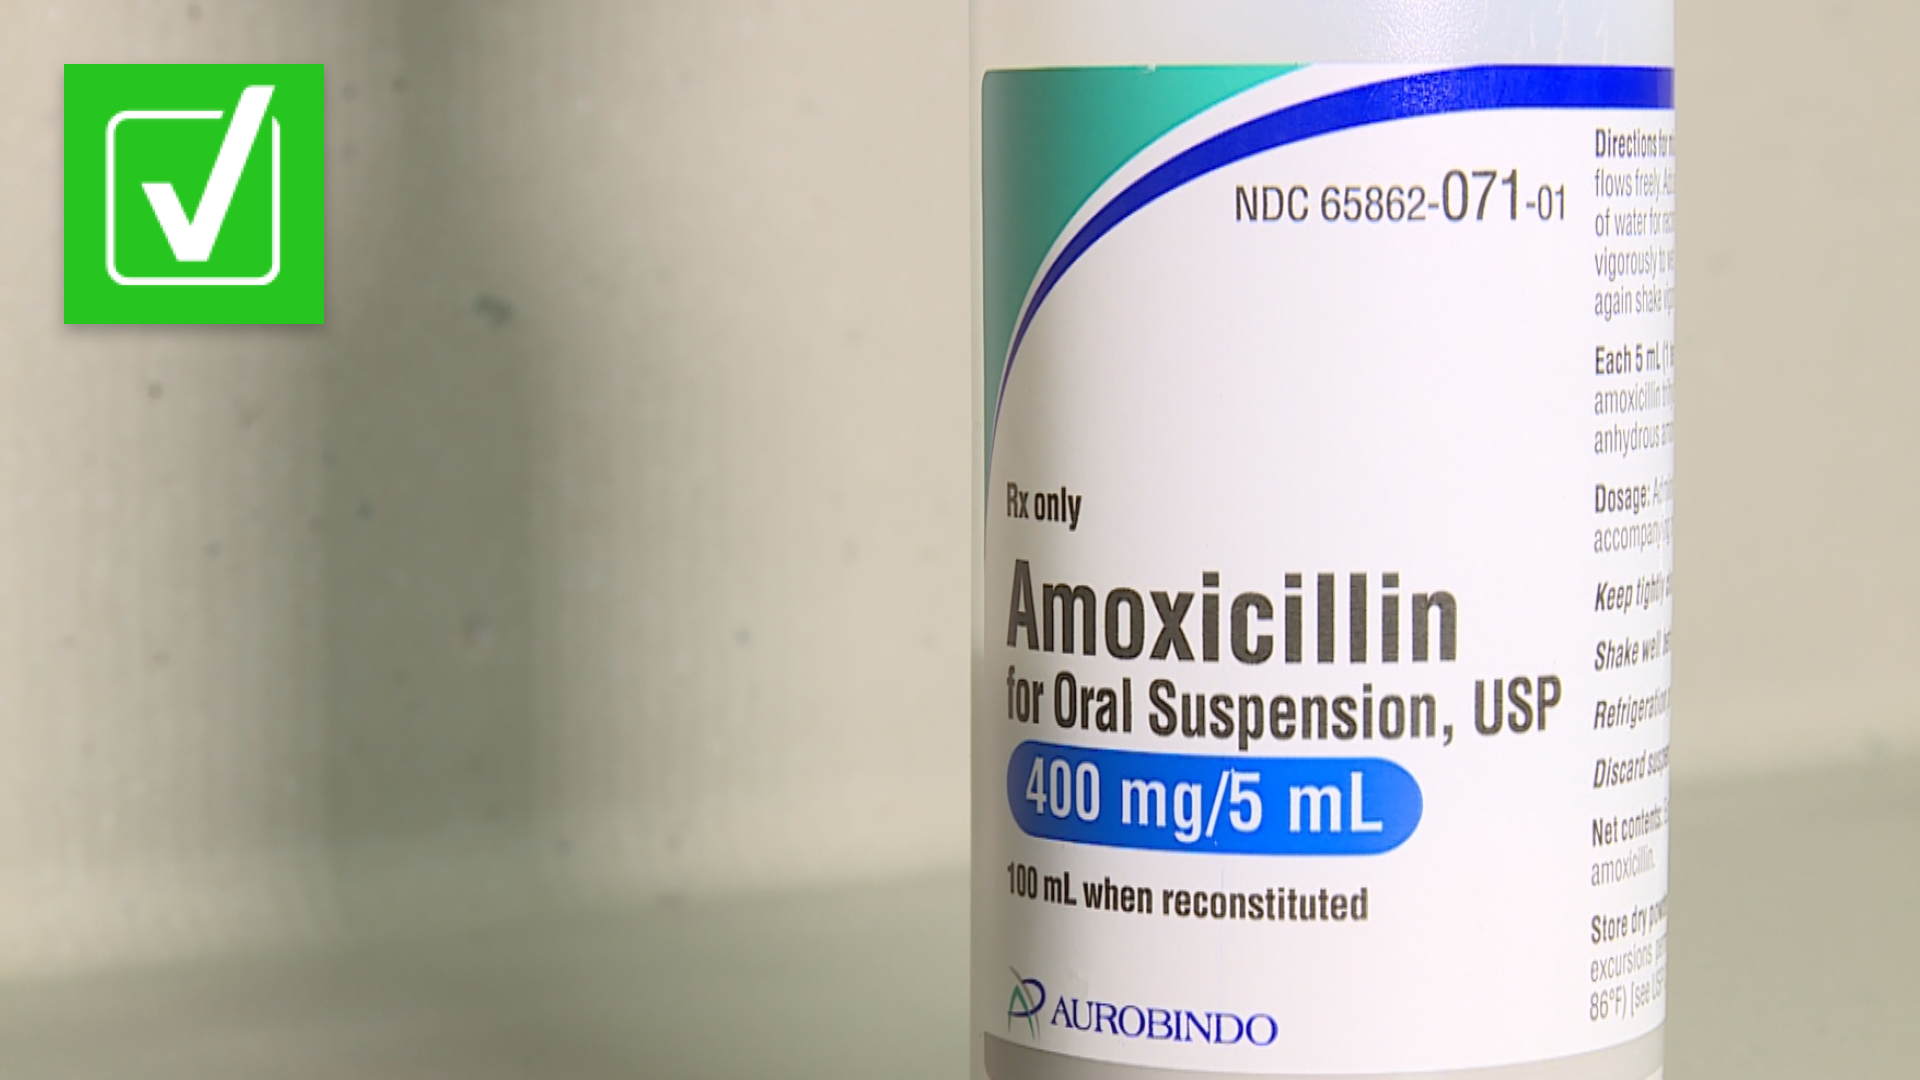 The FDA says the shortage of Amoxicillin is due to increased demand and more sick kids.